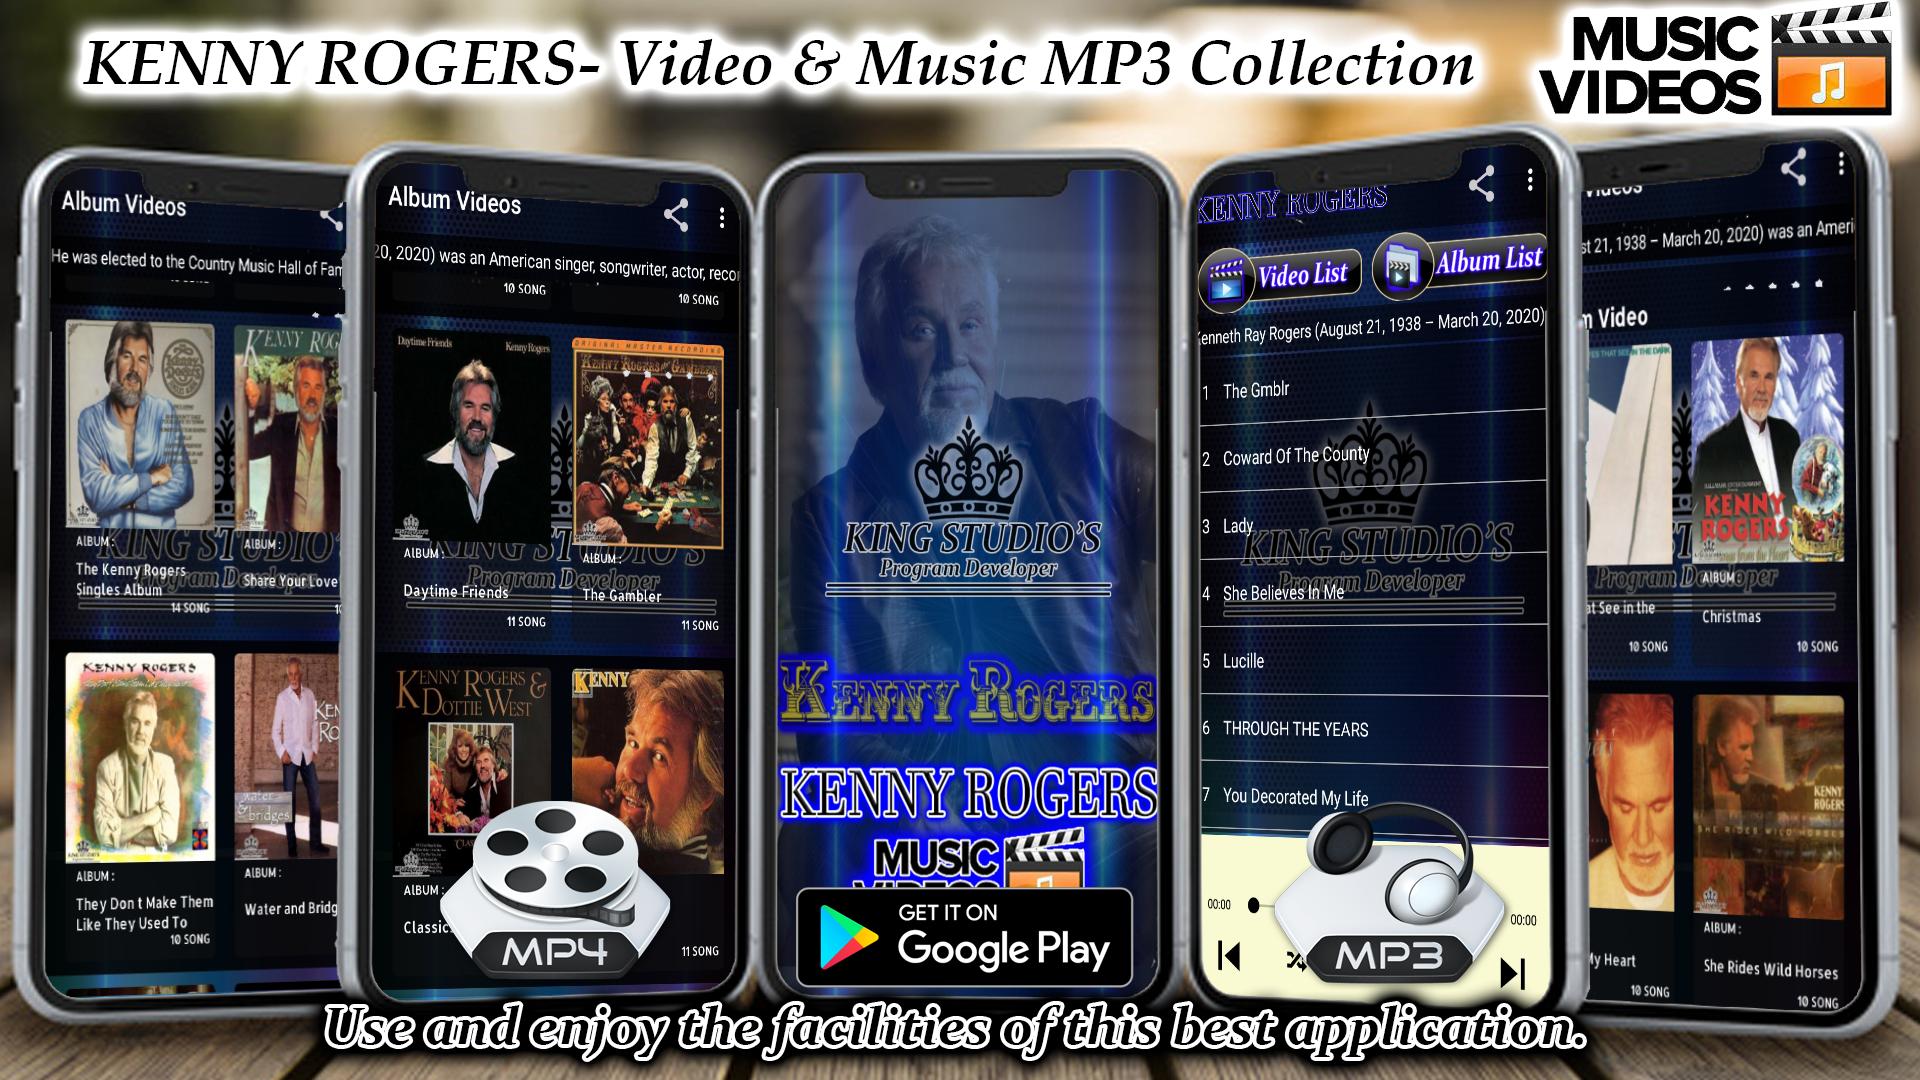 Coward of the county kenny rogers mp3 song free download Kenny Rogers For Android Apk Download